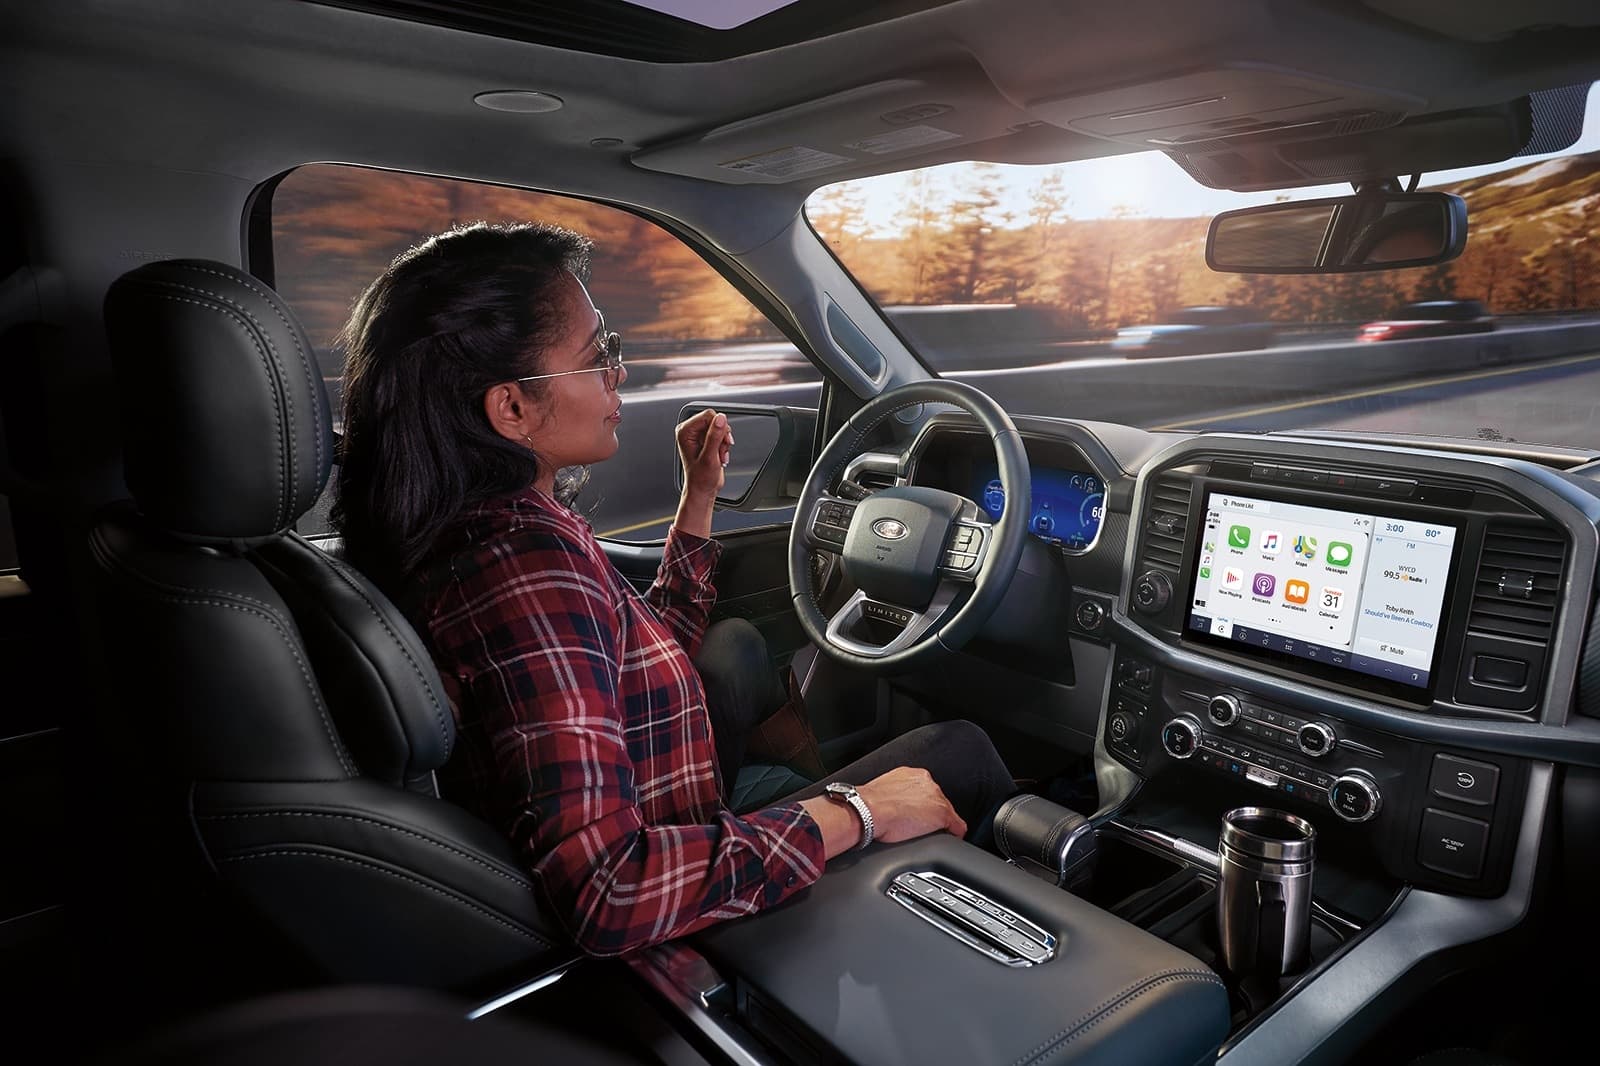 Ford creates division for partial autonomy and hands-free driving tech